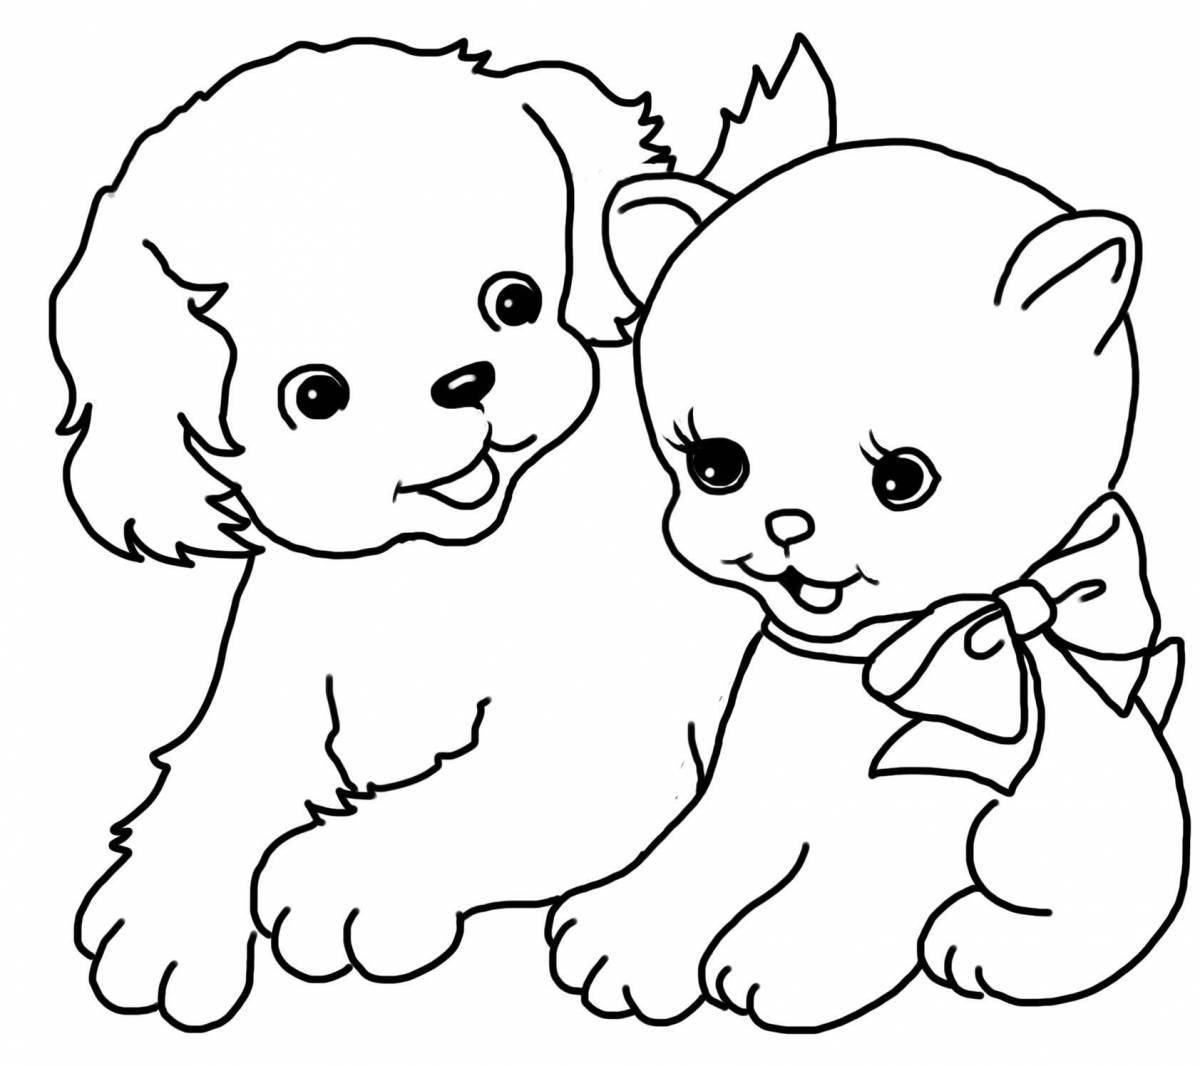 Radiant coloring book for girls, cats and dogs